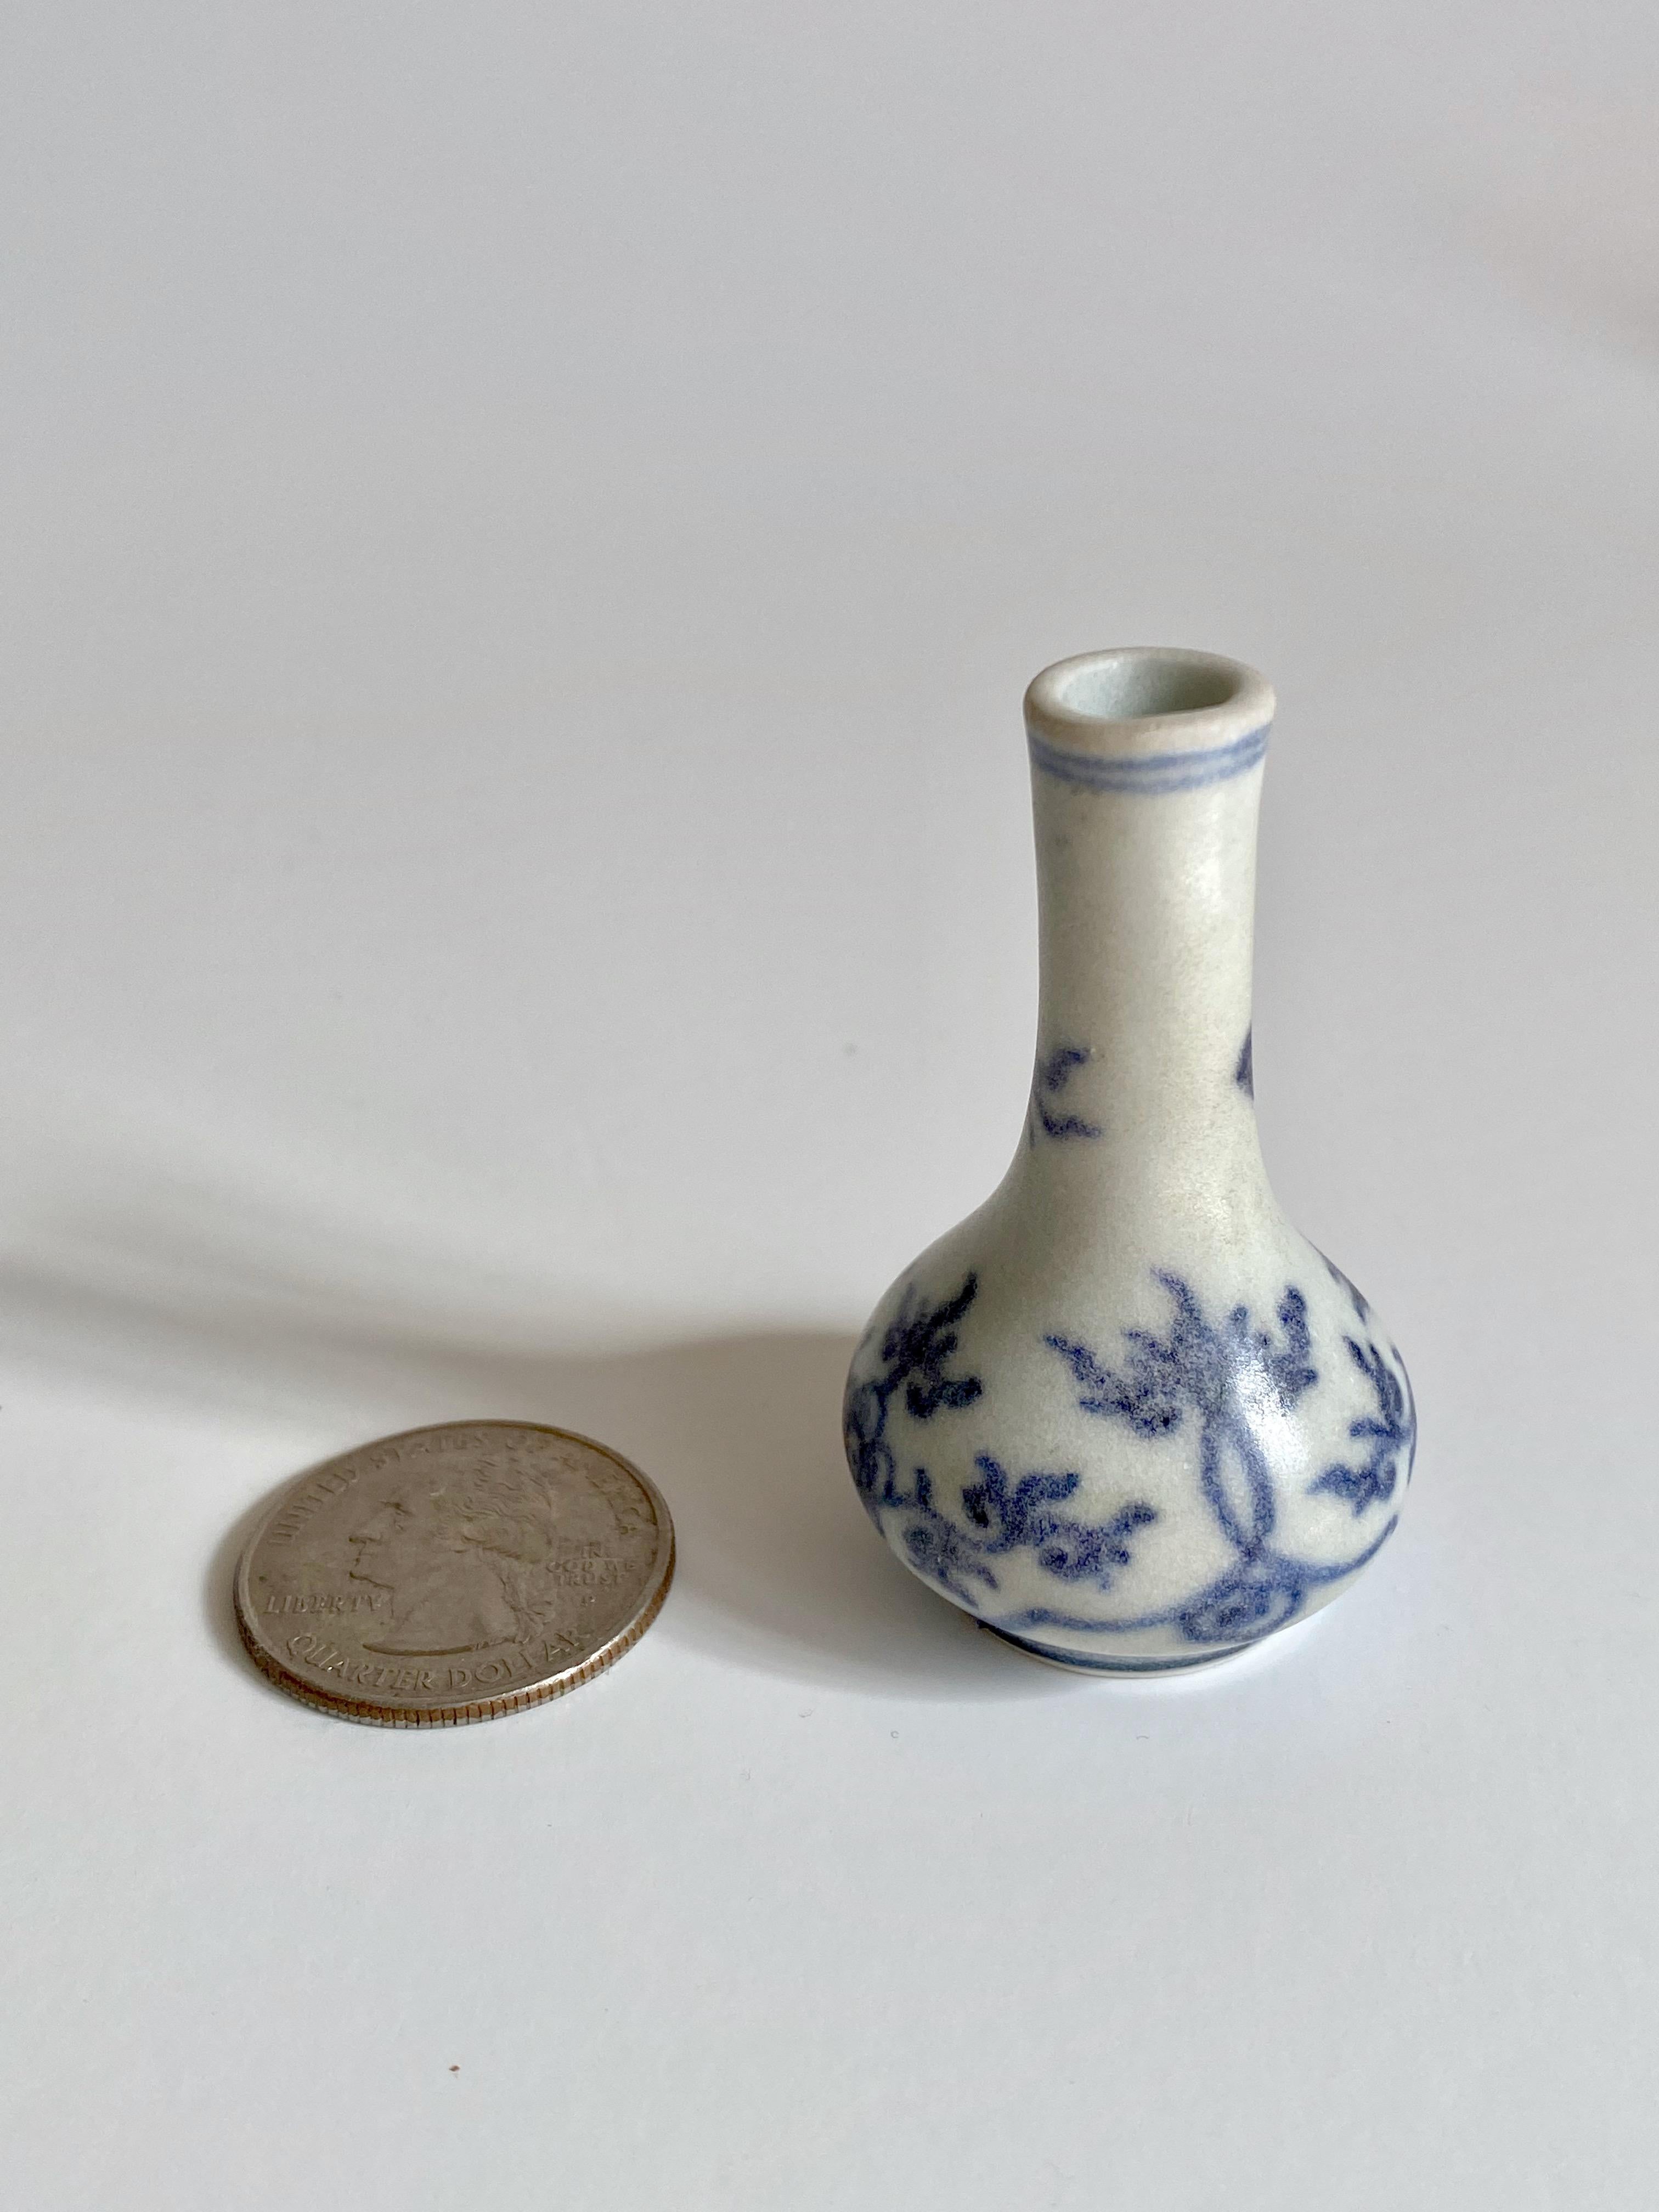 Hand-Painted Miniature Vase from Hatcher Collection Decorated with Birds and Flowers For Sale